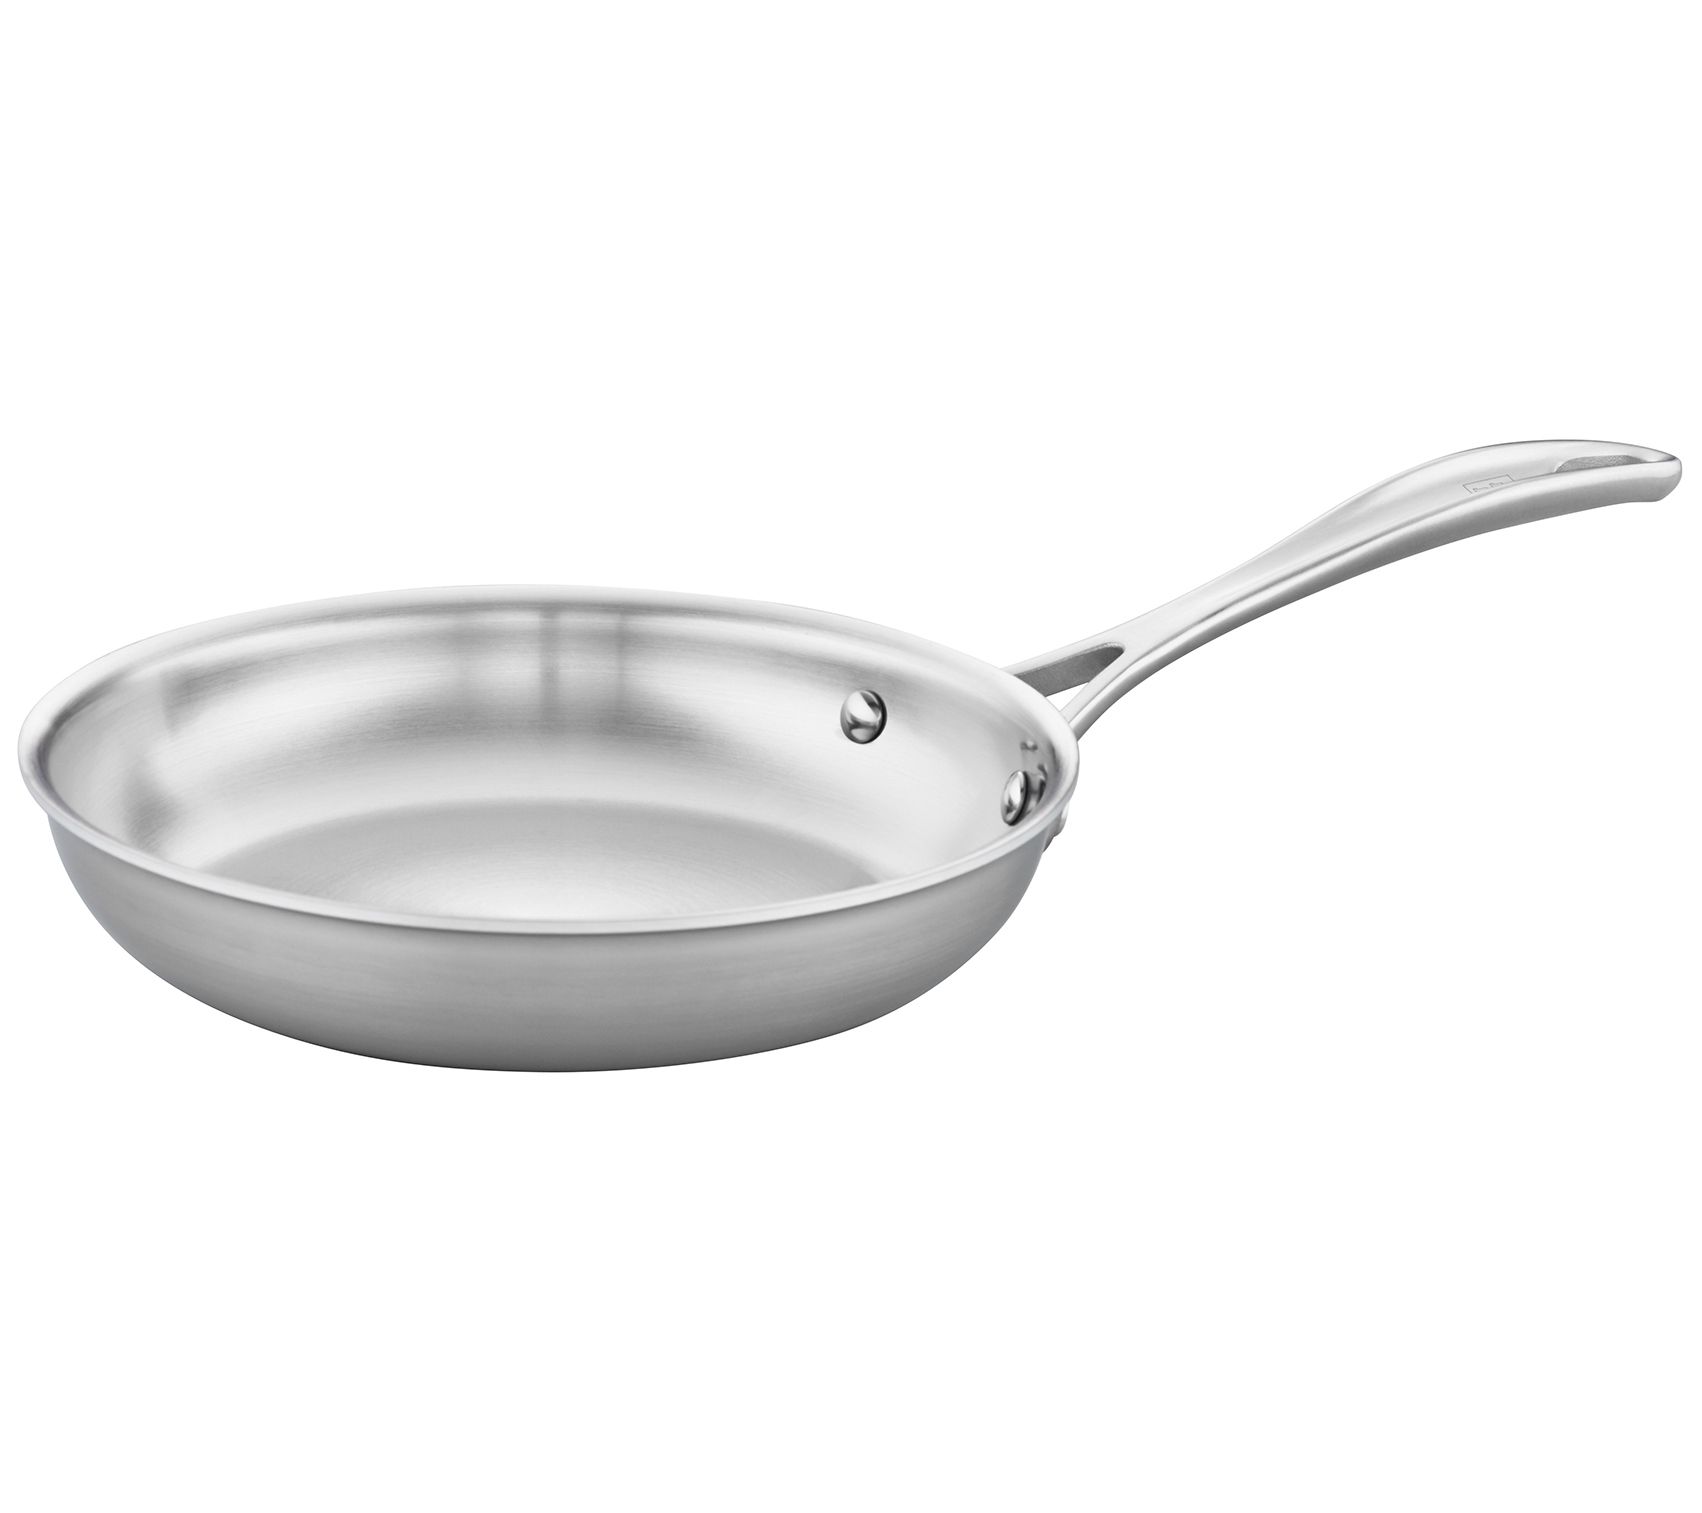 ZWILLING Spirit 3-ply 1-qt Stainless Steel Saucepan 